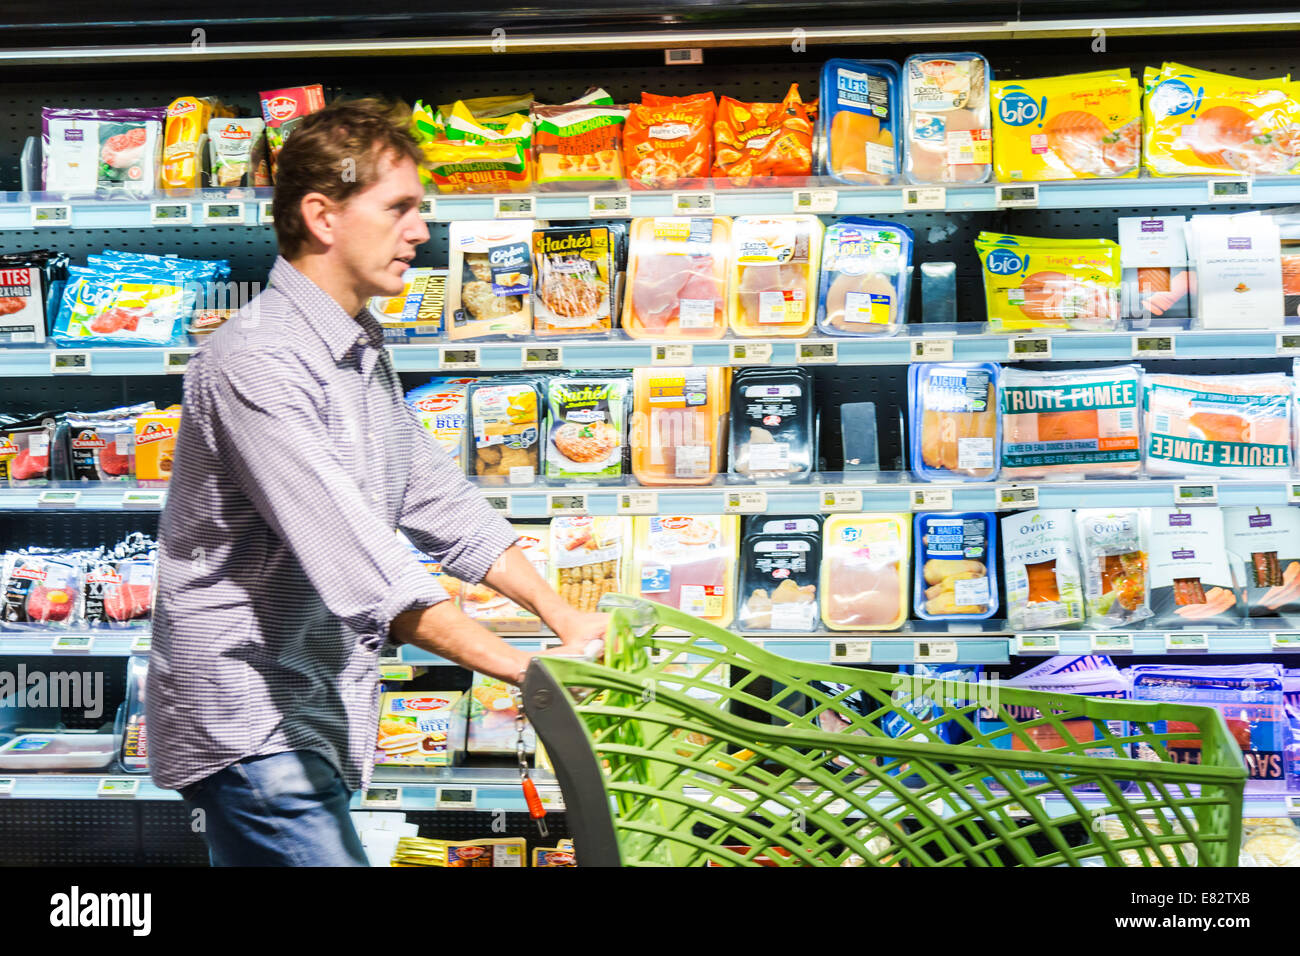 Man in a supermarket. Stock Photo